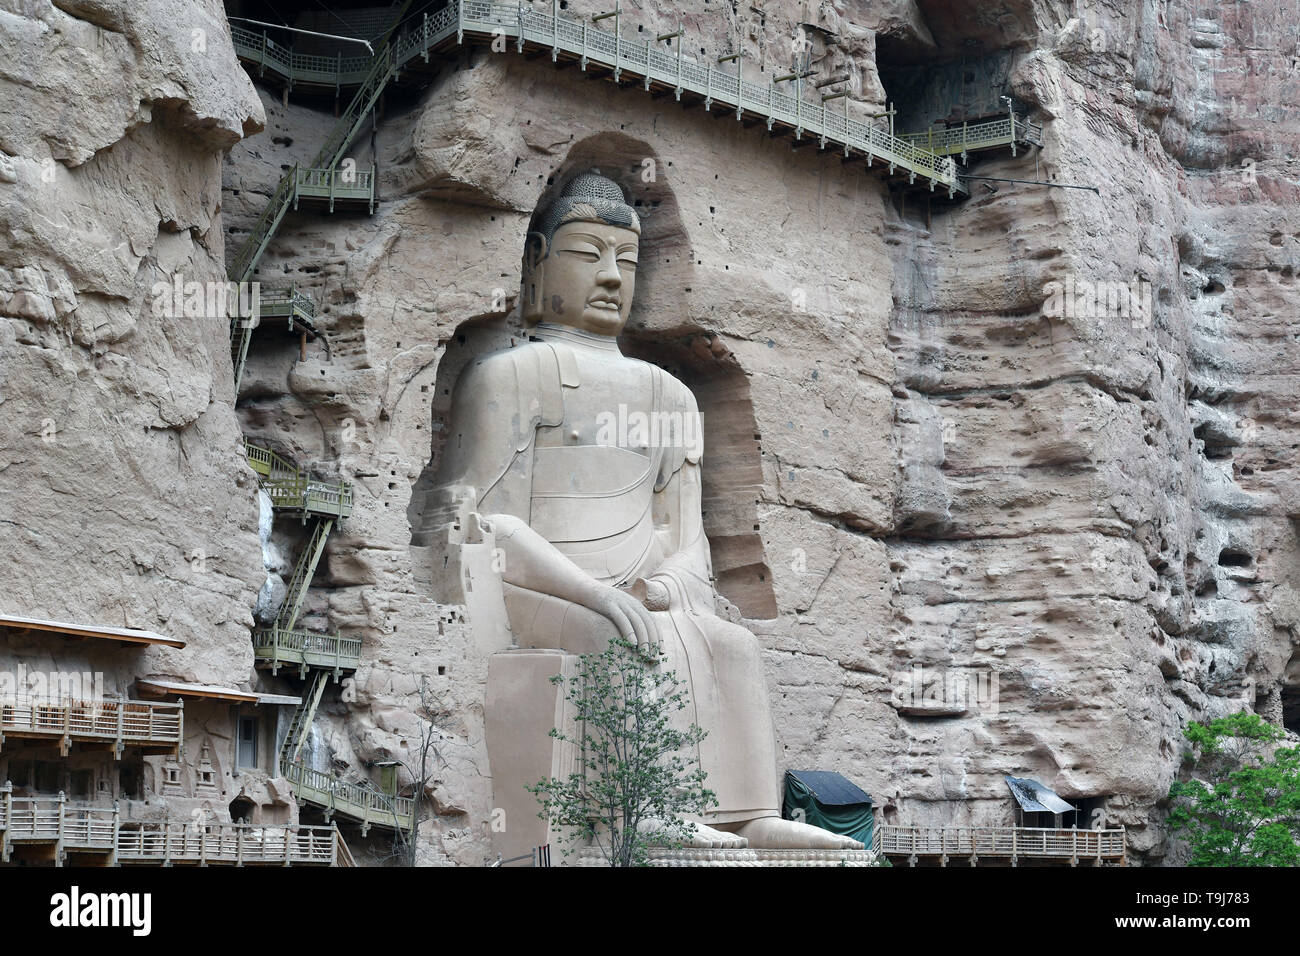 Yongjing. 18th May, 2019. A buddhist statue is shown in the photo taken on May 18, 2019 at Bingling Danxia National Geological Park in Yongjing County, northwest China's Gansu Province. Danxia landform is a unique type of landscapes formed from red sandstone and characterized by steep cliffs. Credit: Fan Peishen/Xinhua/Alamy Live News Stock Photo